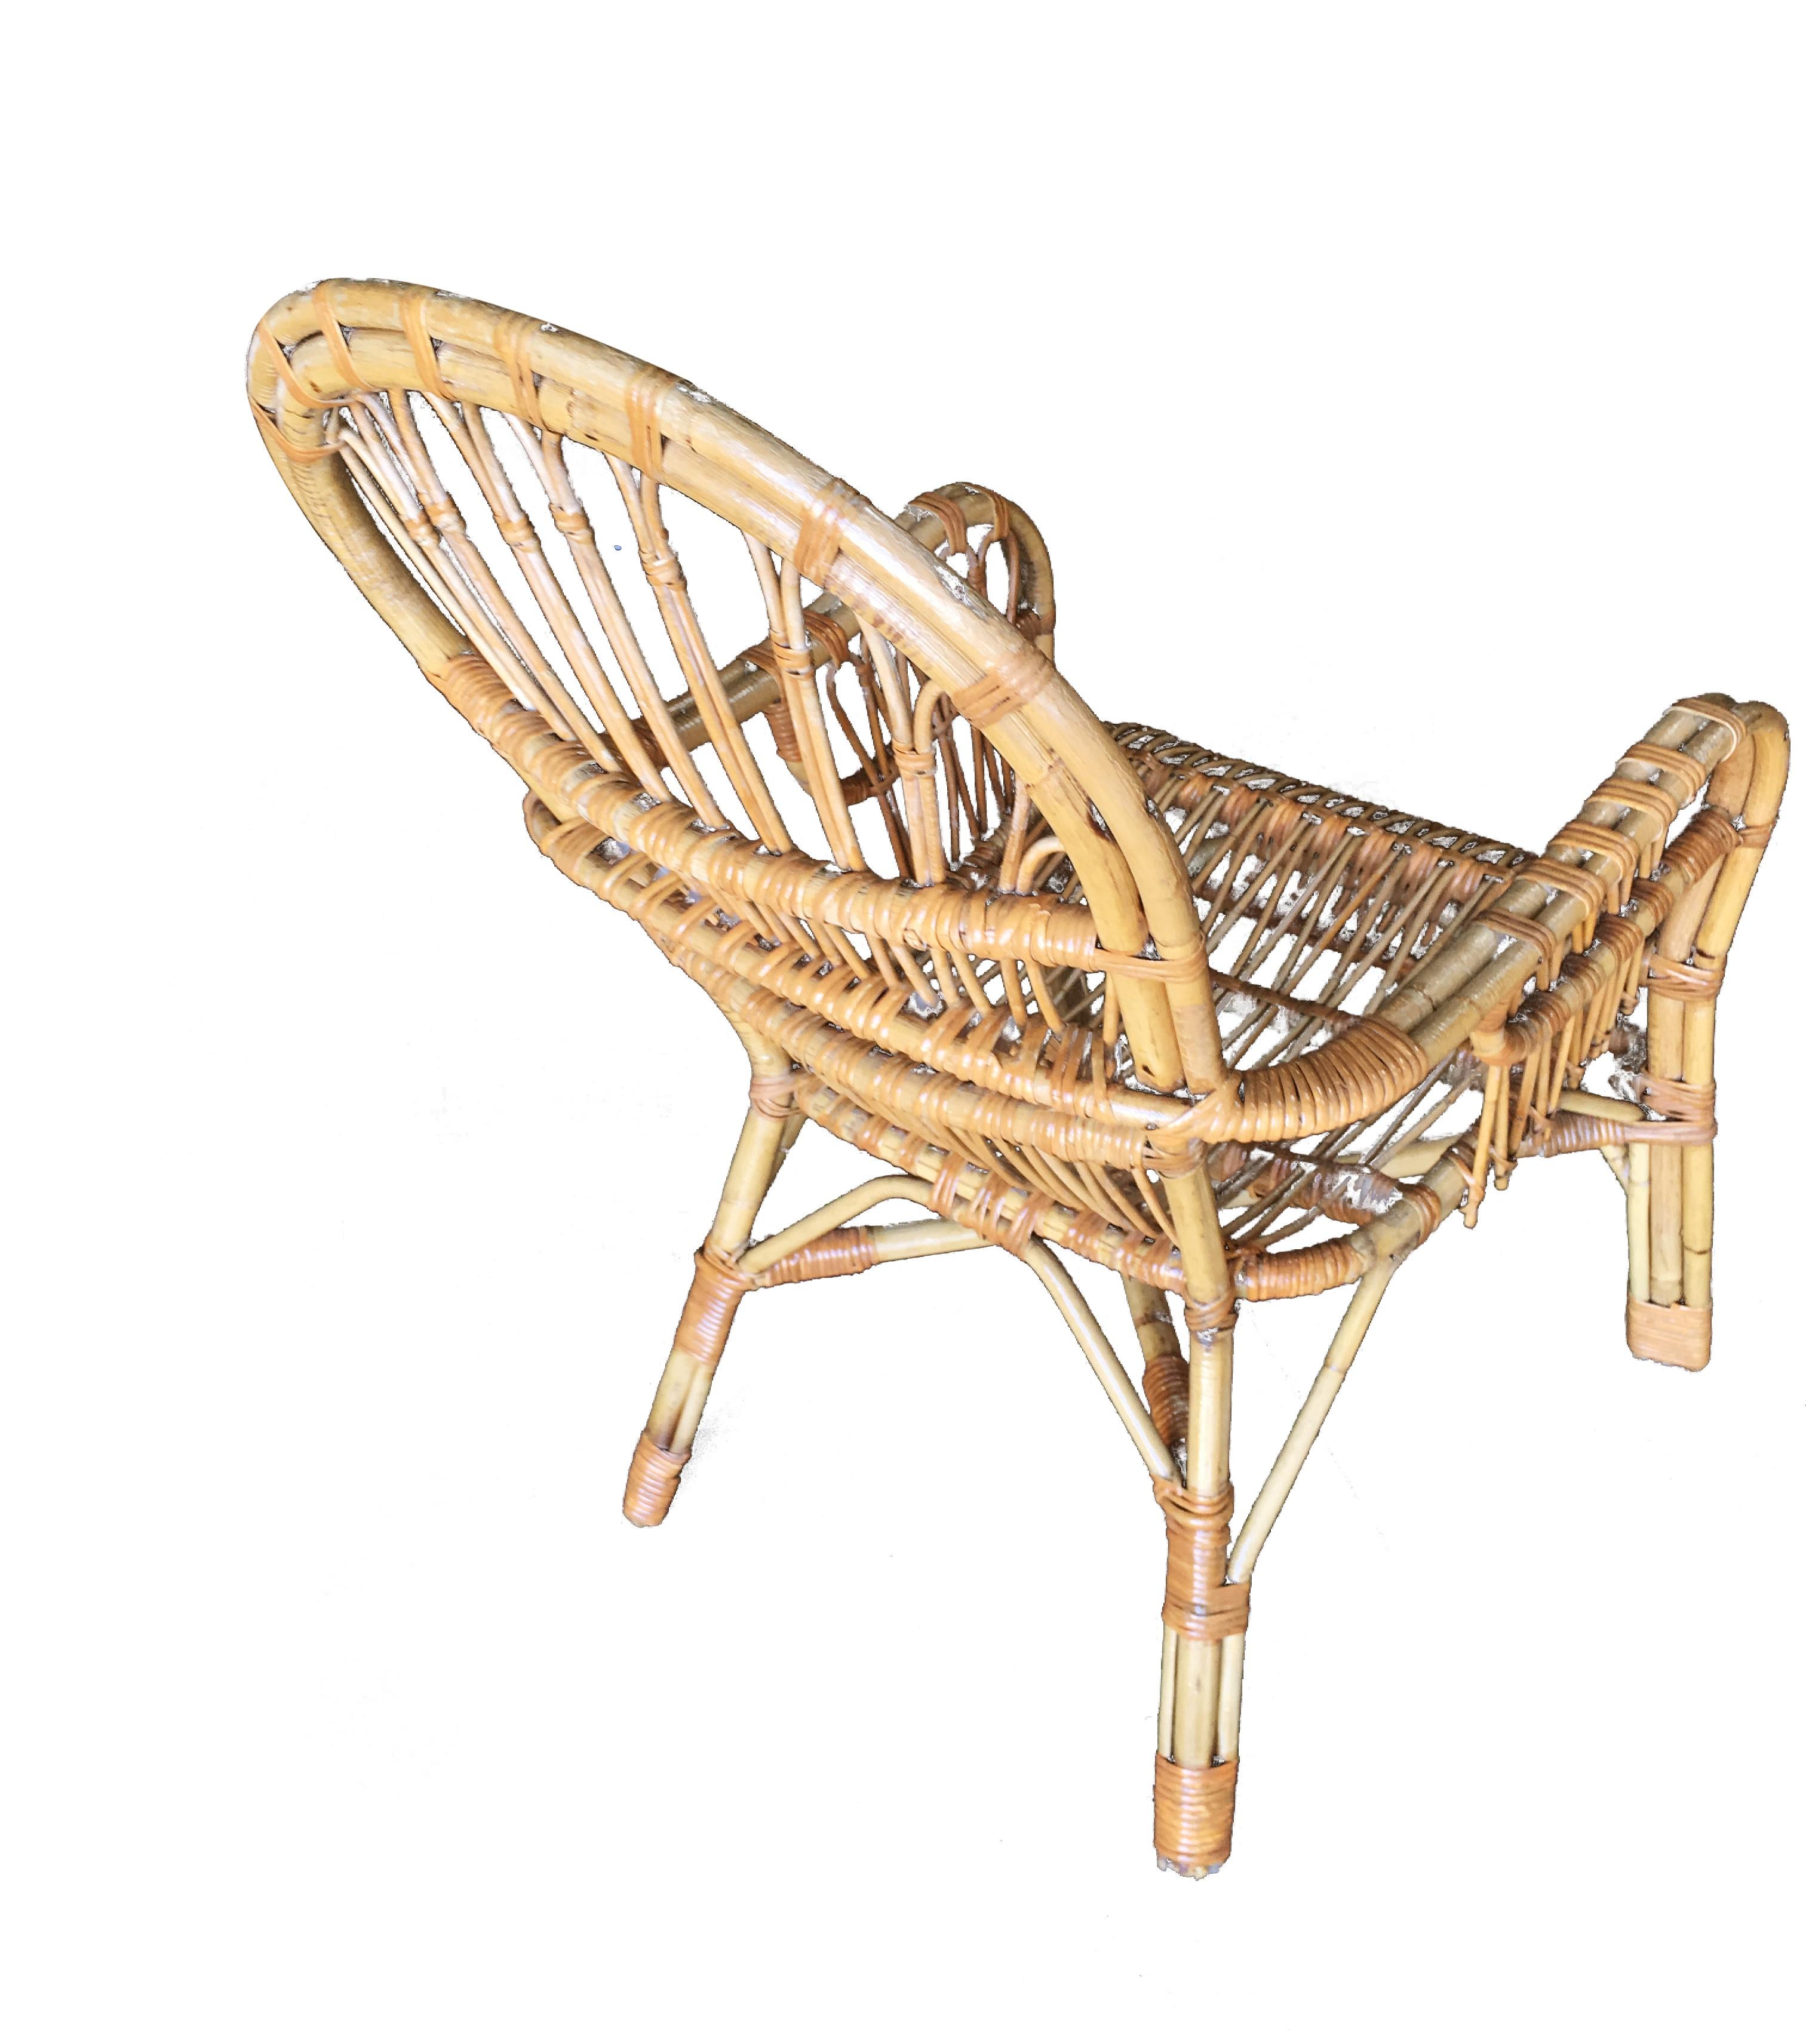 Franco Albini style stick rattan lounge chair featuring unique organic midcentury style.
 
Restored to new for you.
 
All rattan, bamboo and wicker furniture has been painstakingly refurbished to the highest standards with the best materials. All